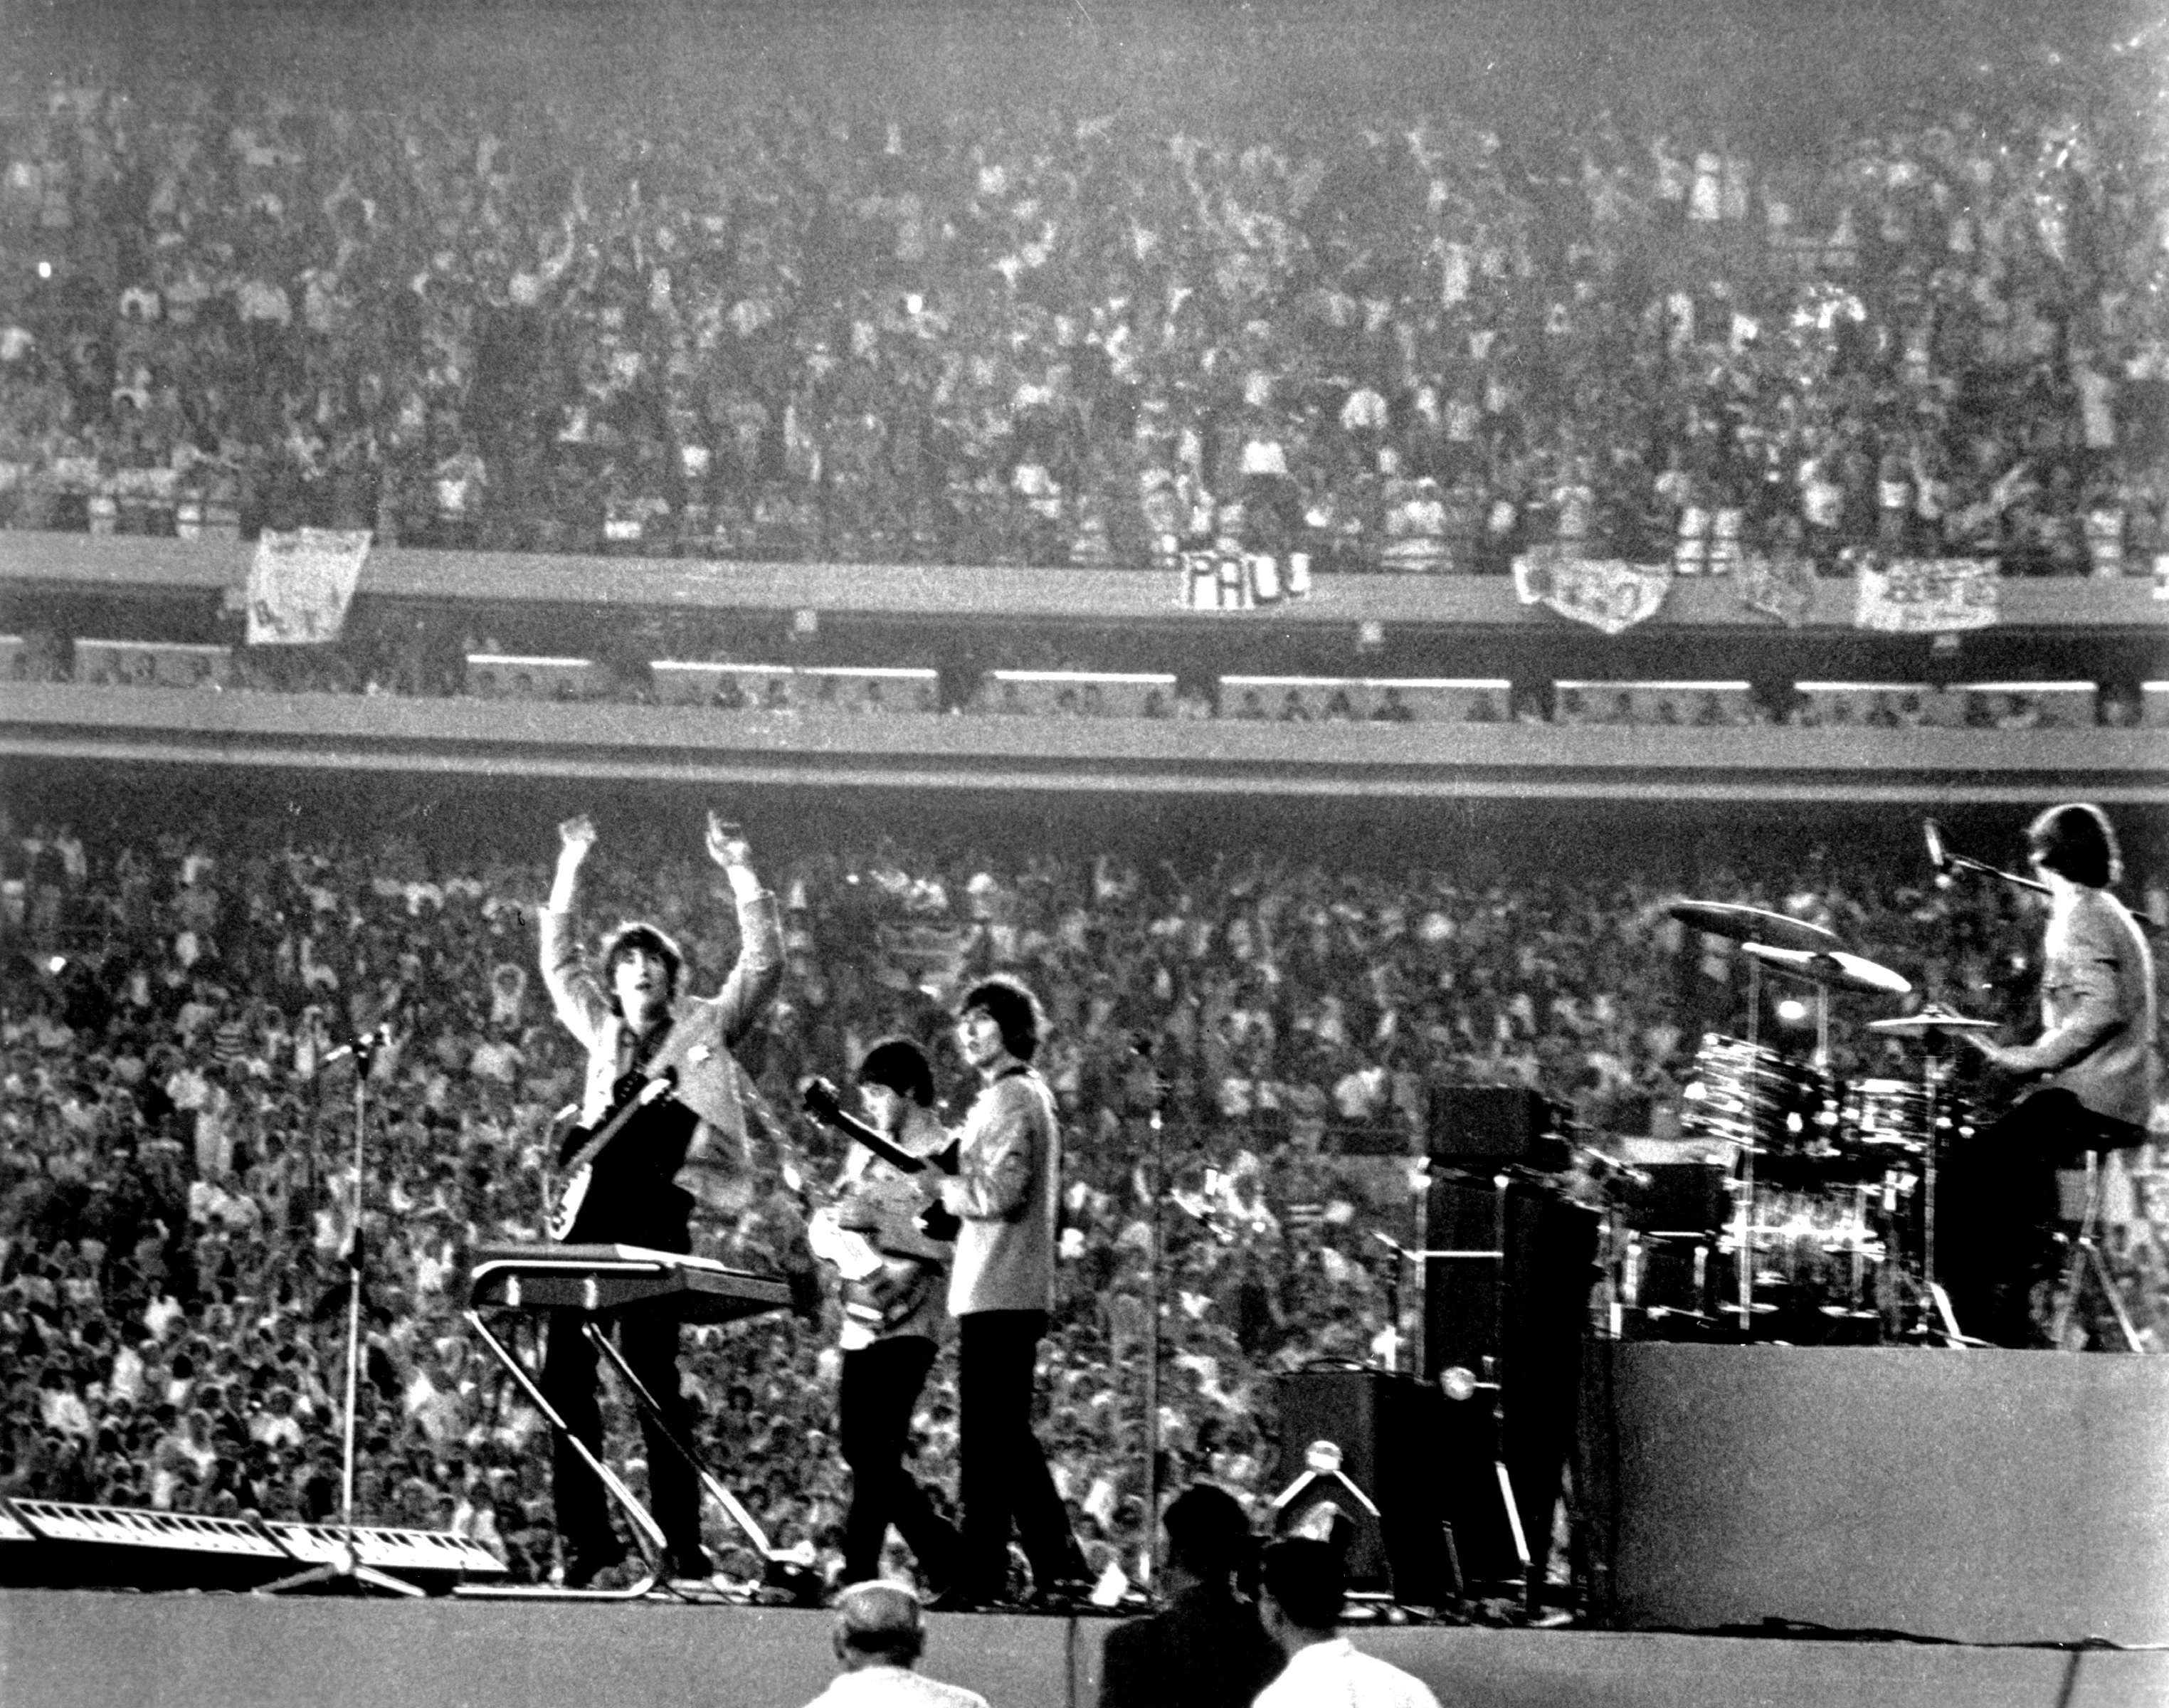 A Night with The Fab Four: Reliving The Beatles’ Greatest Concert Moments